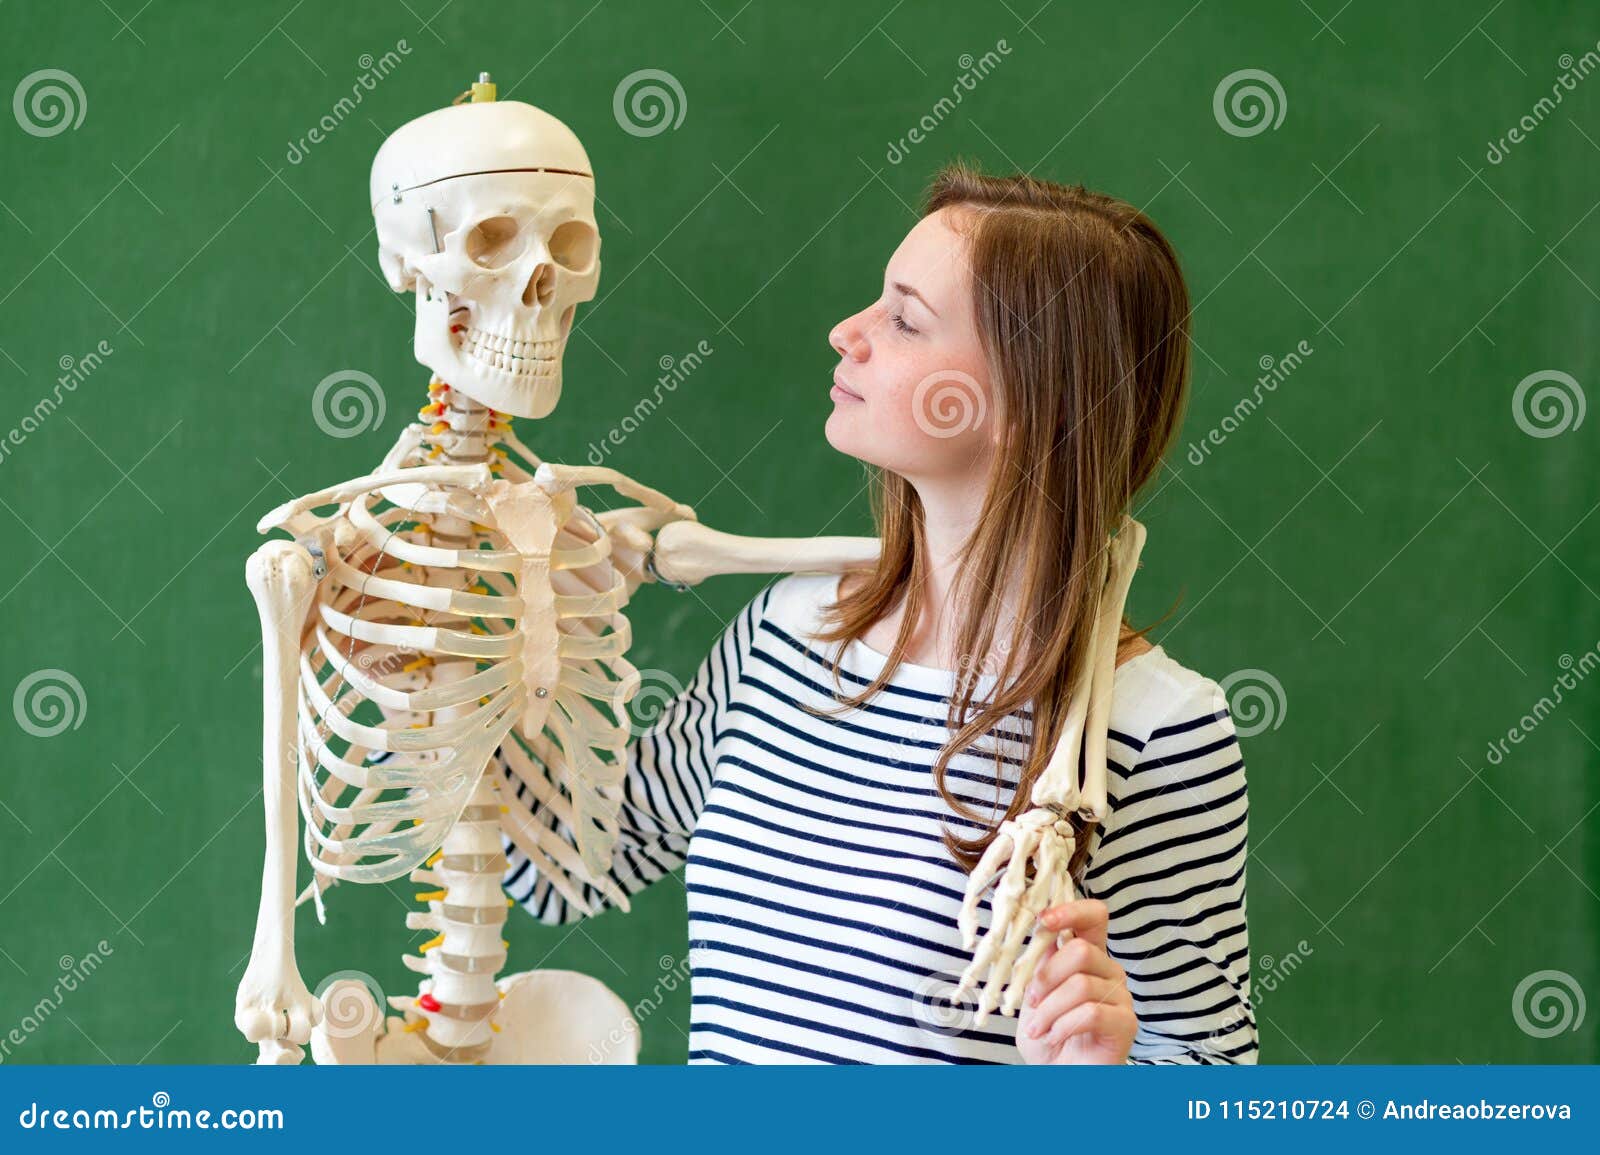 cool female high school student portrait with an artificial human body skeleton. student having fun in biology class.